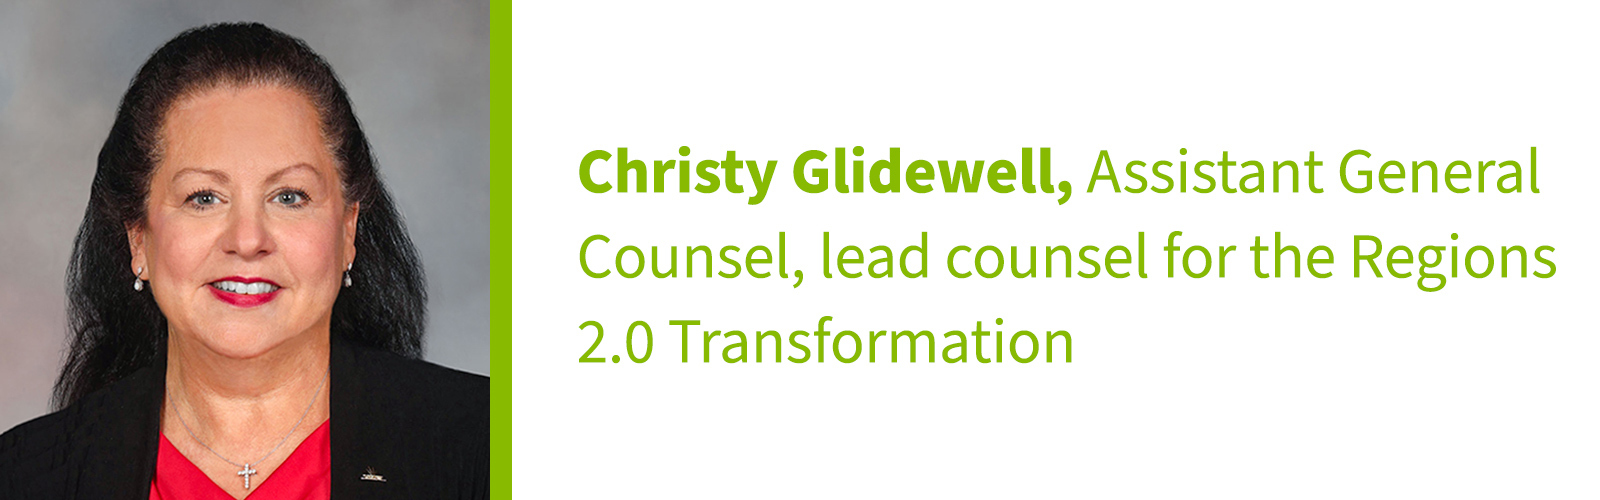 Christy Glidewell headshot and title